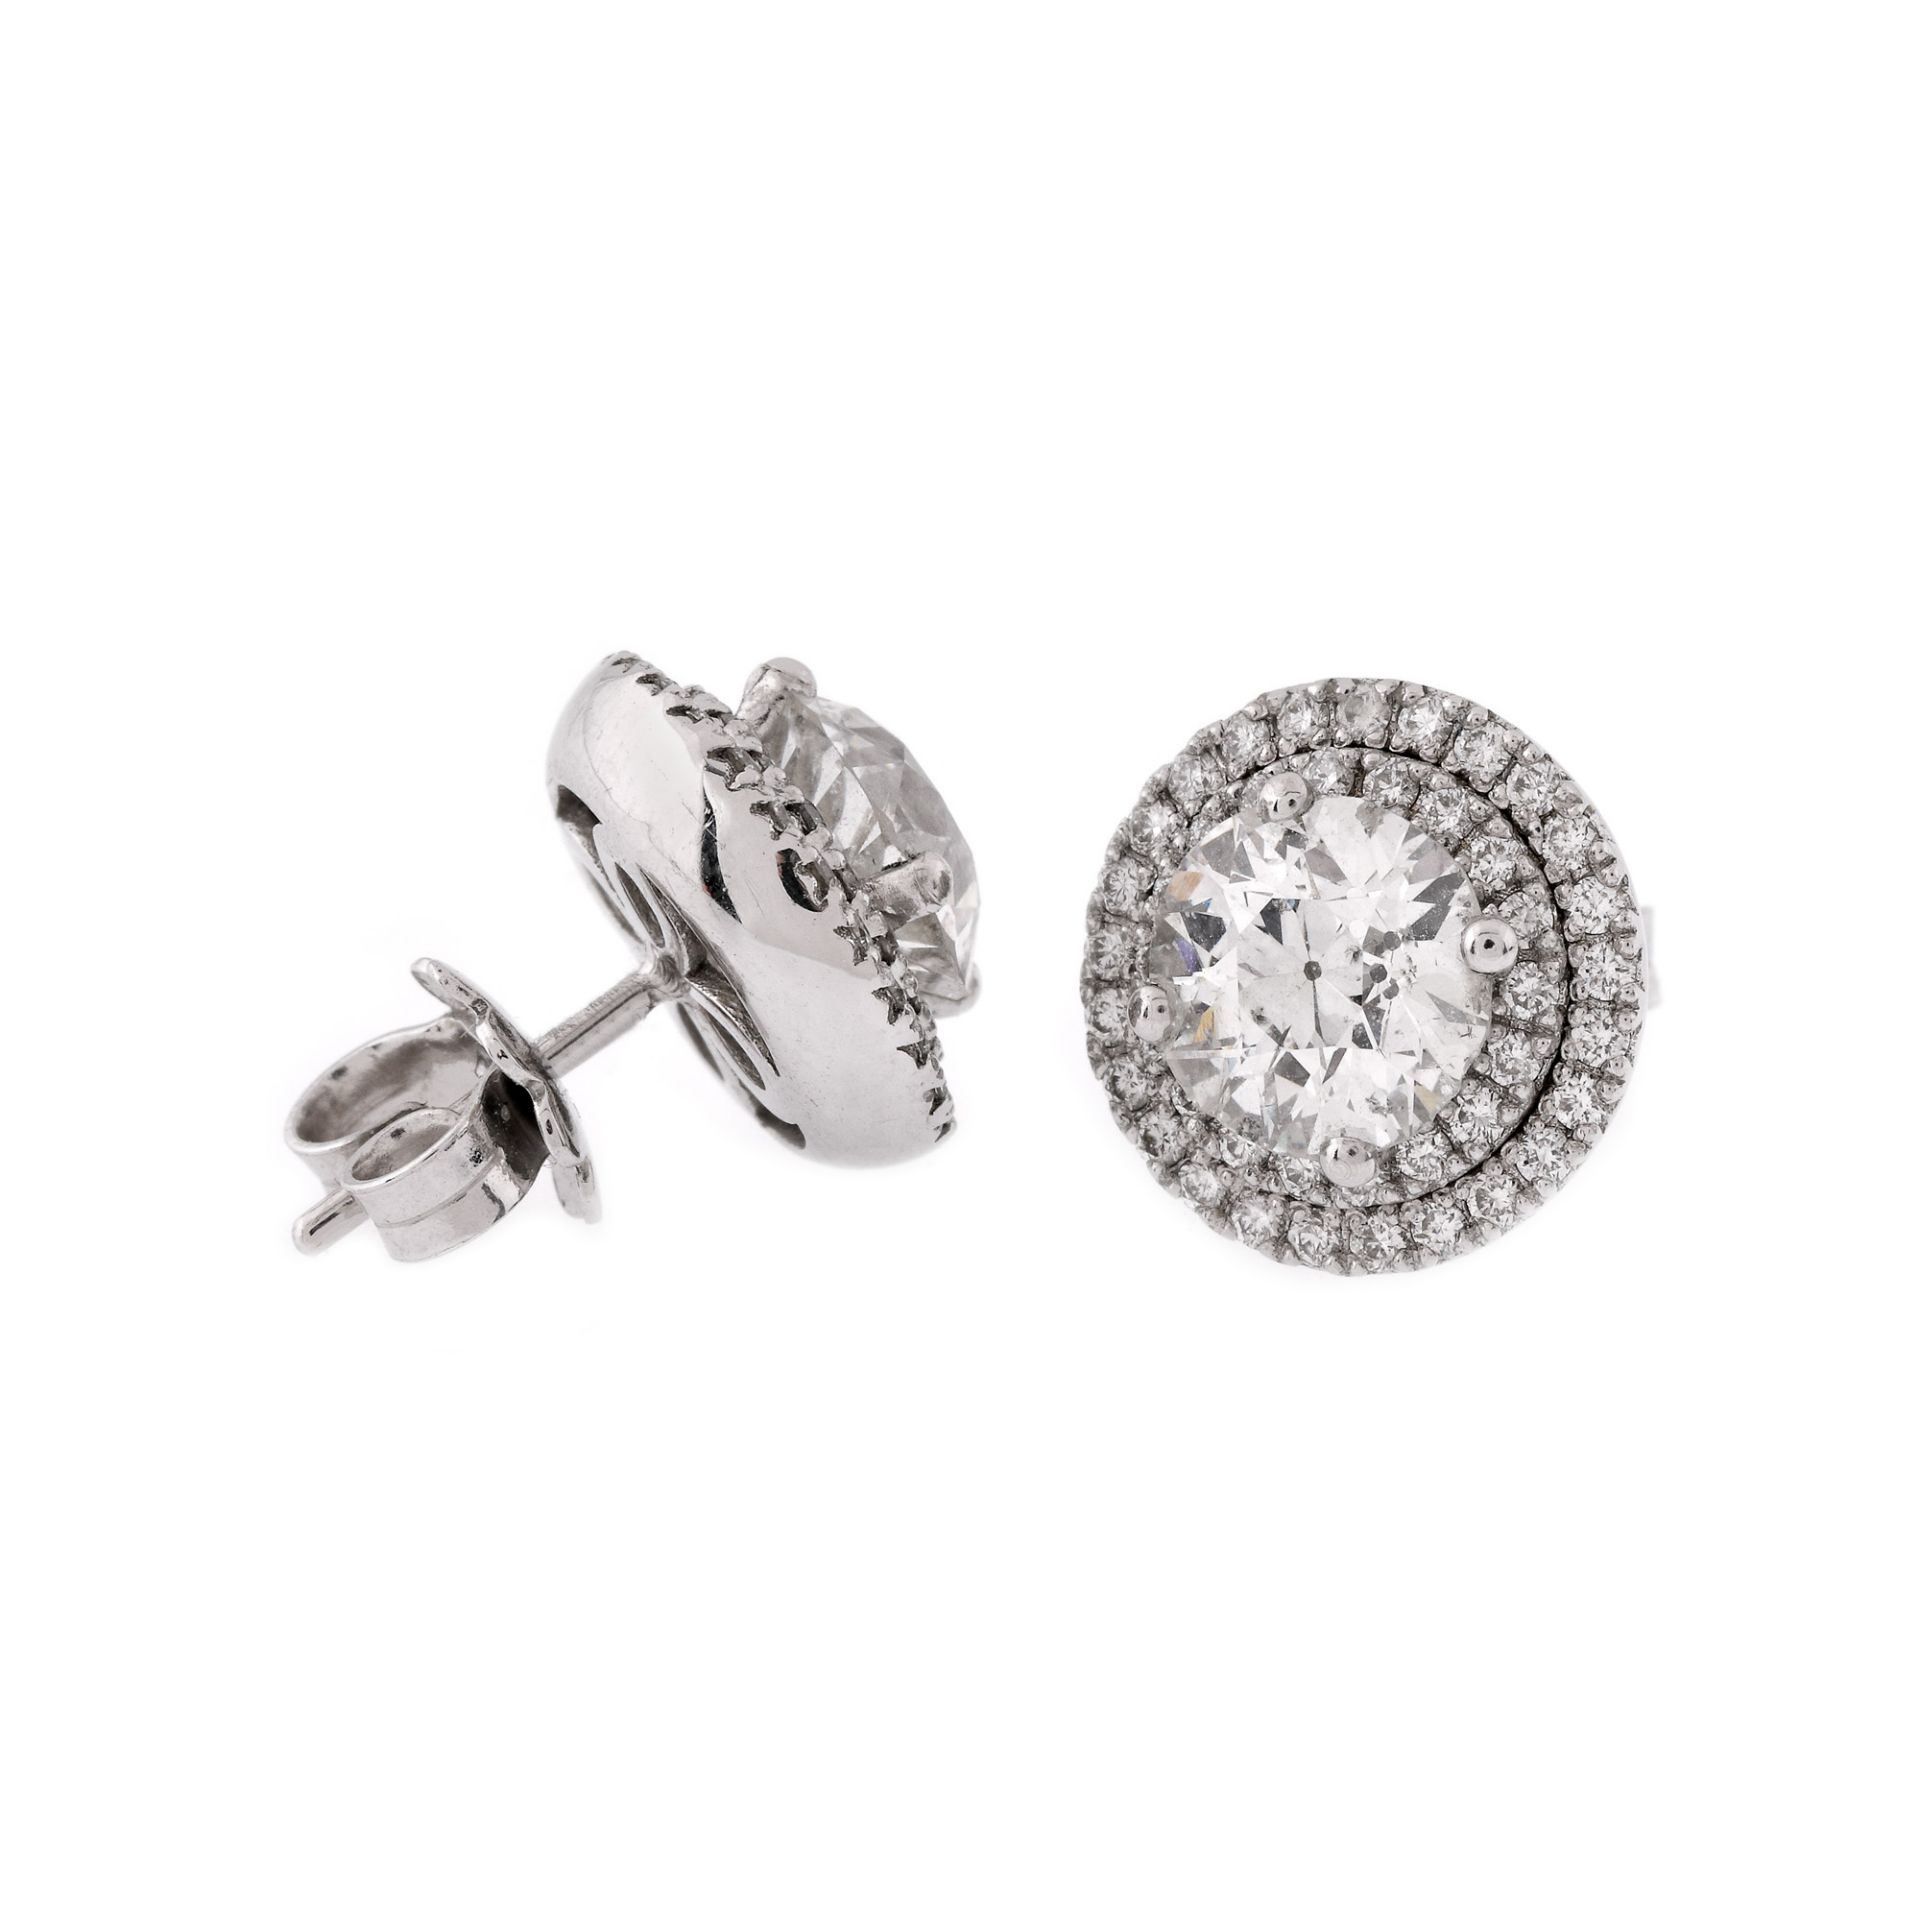 Pair of earrings, white gold, adorned with diamonds - Image 2 of 2